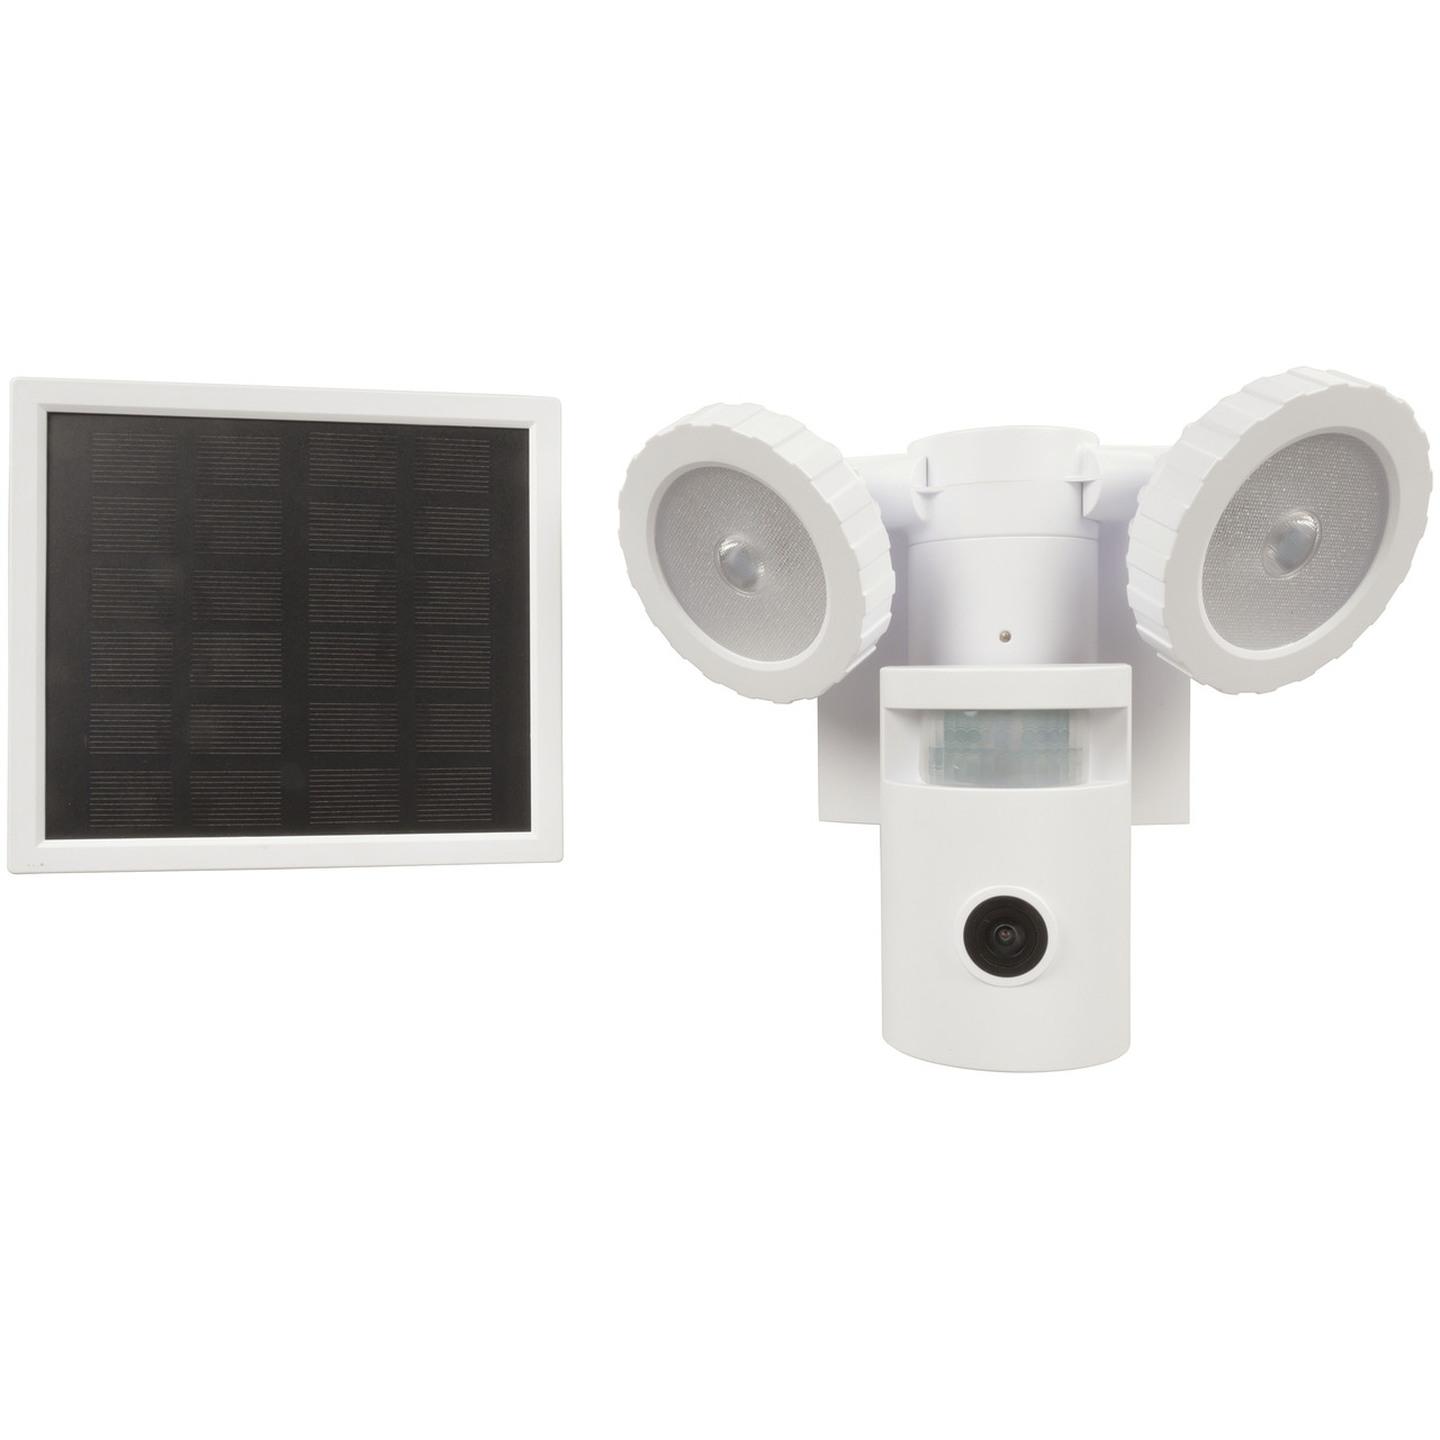 720p Motion Wi-Fi Camera with Round Flood Lights